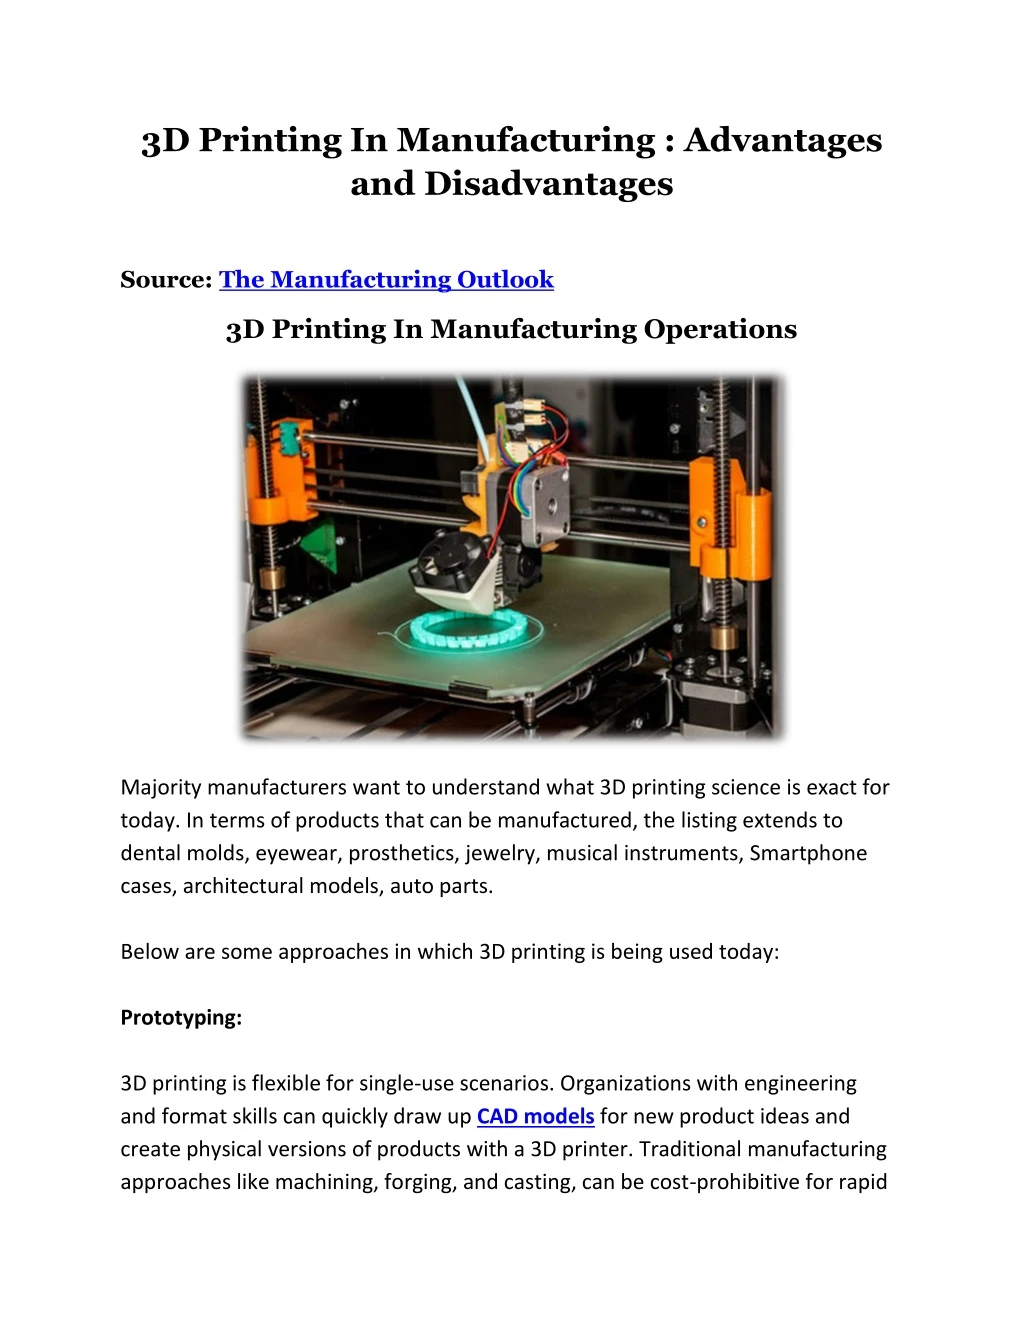 PPT - 3D Printing In Manufacturing Industry PowerPoint Presentation ...